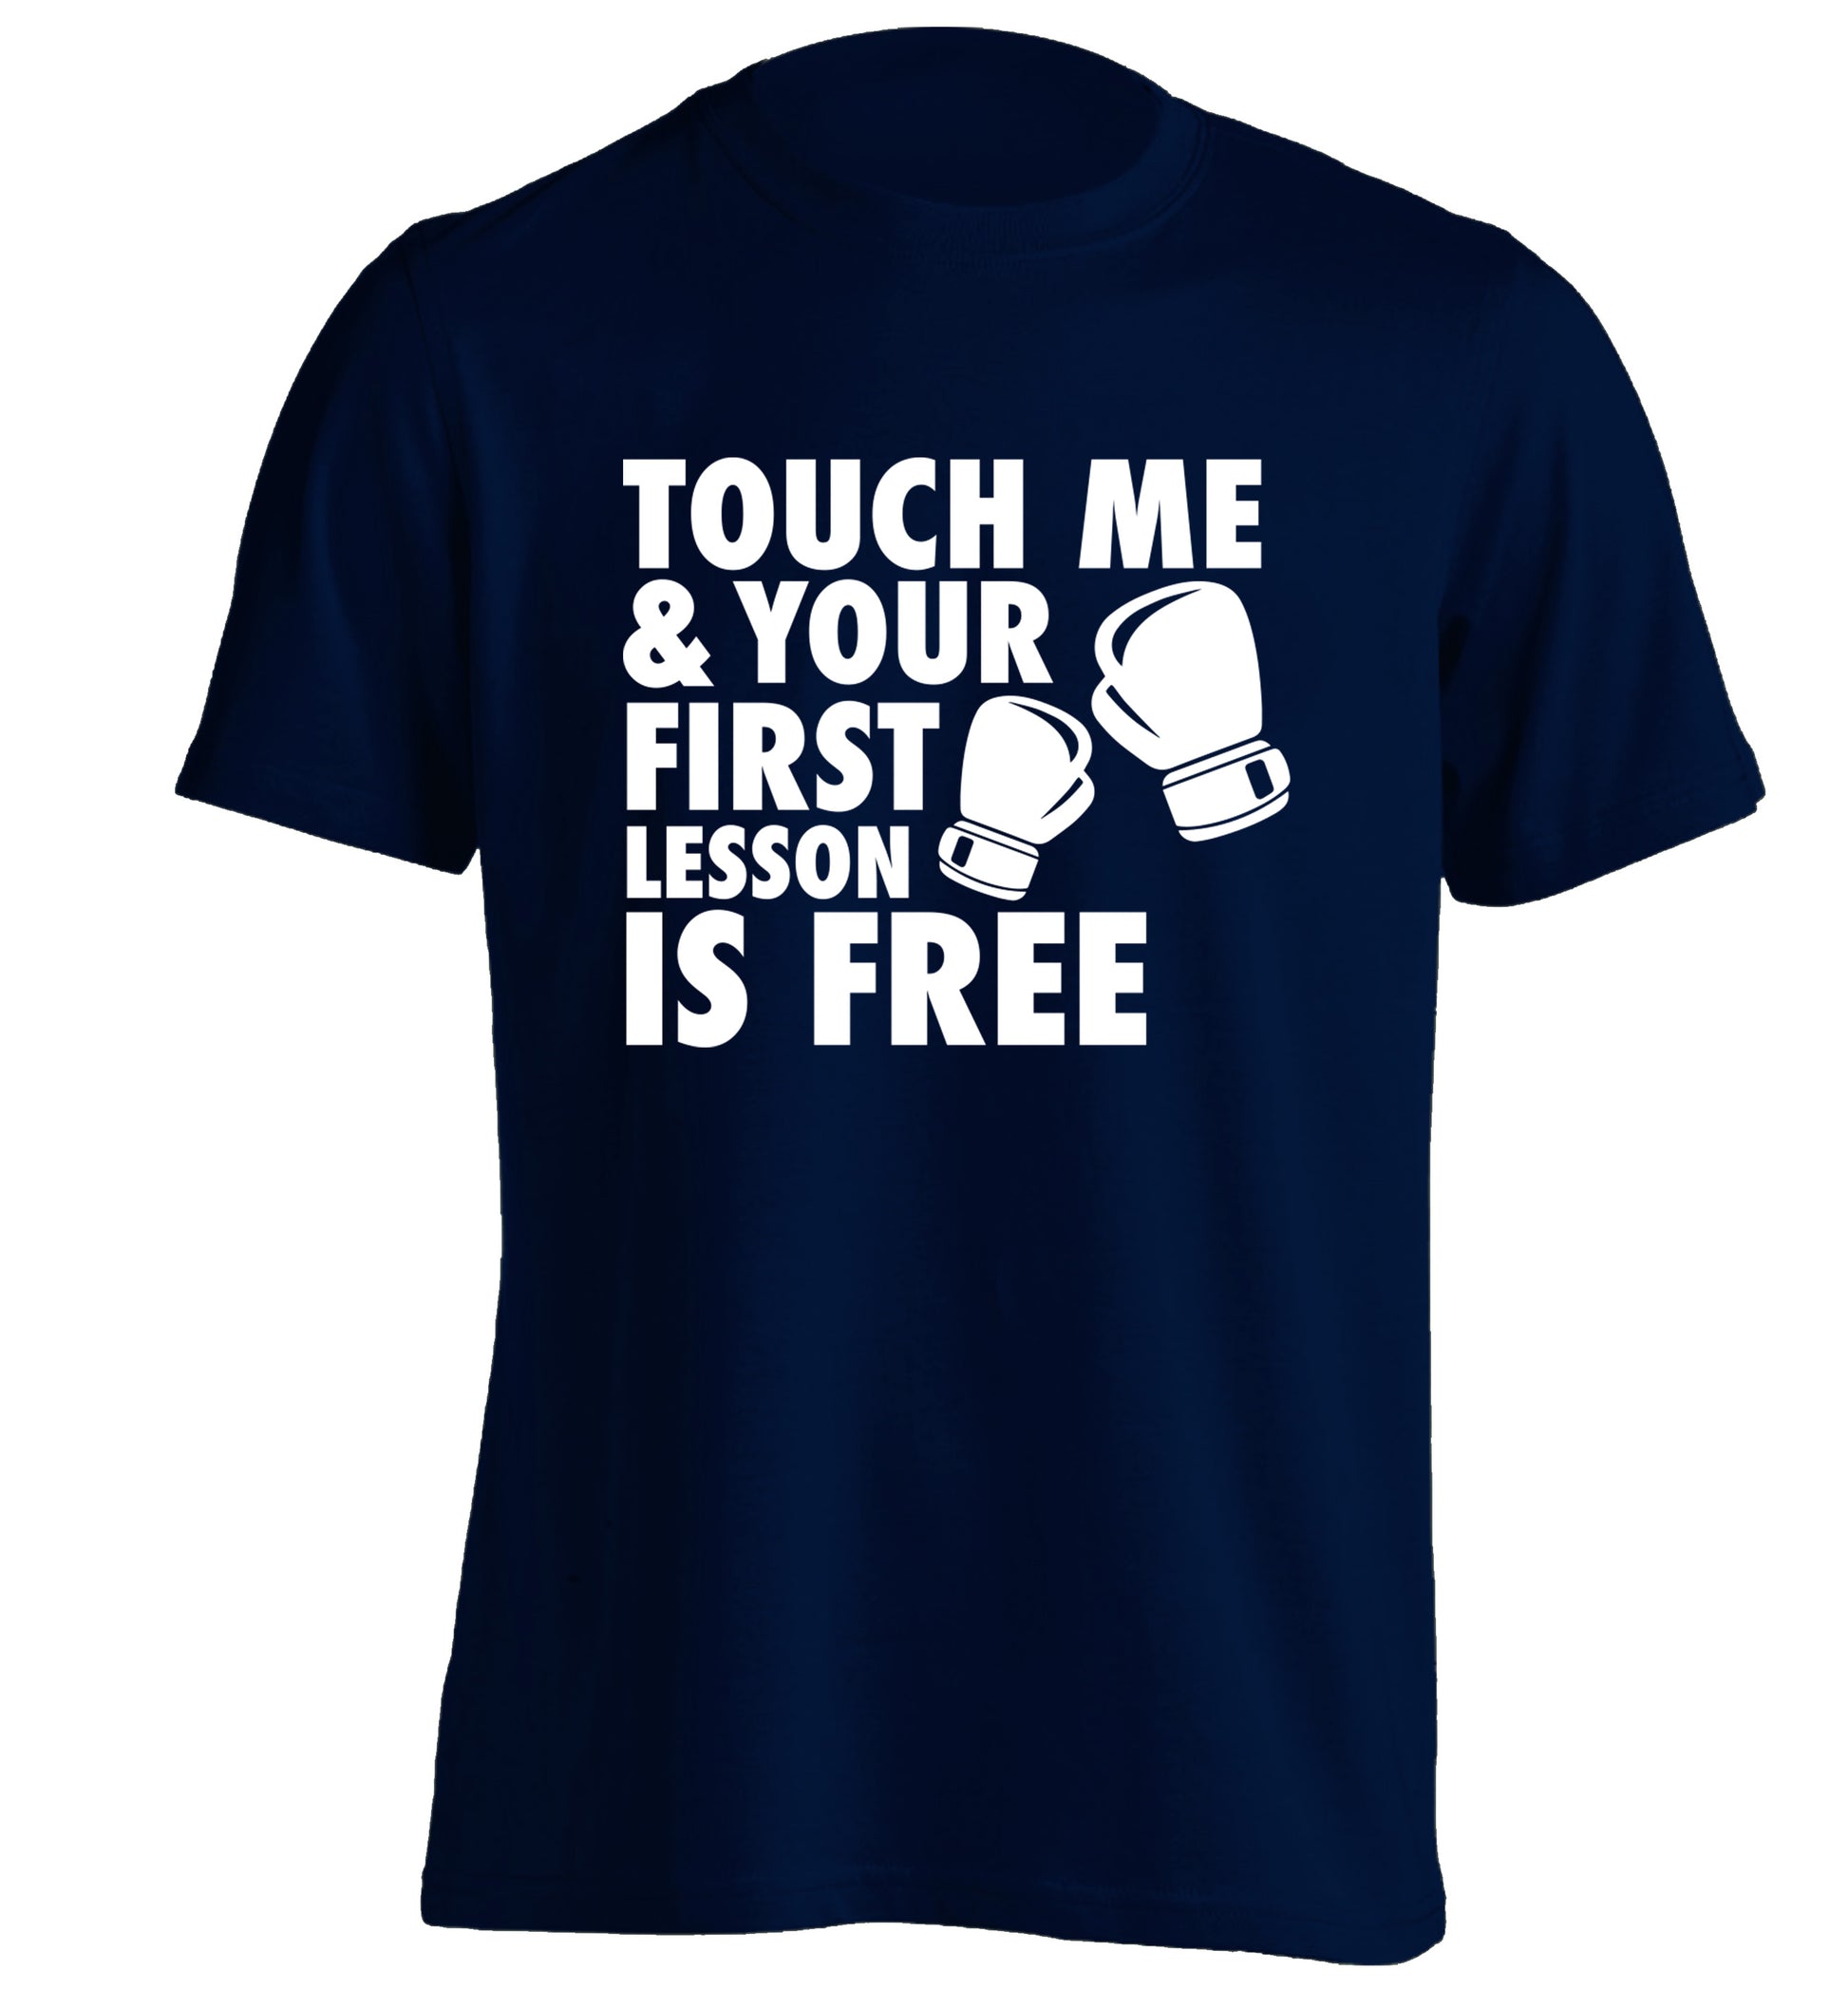 Touch me and your First Lesson is Free  adults unisex navy Tshirt 2XL